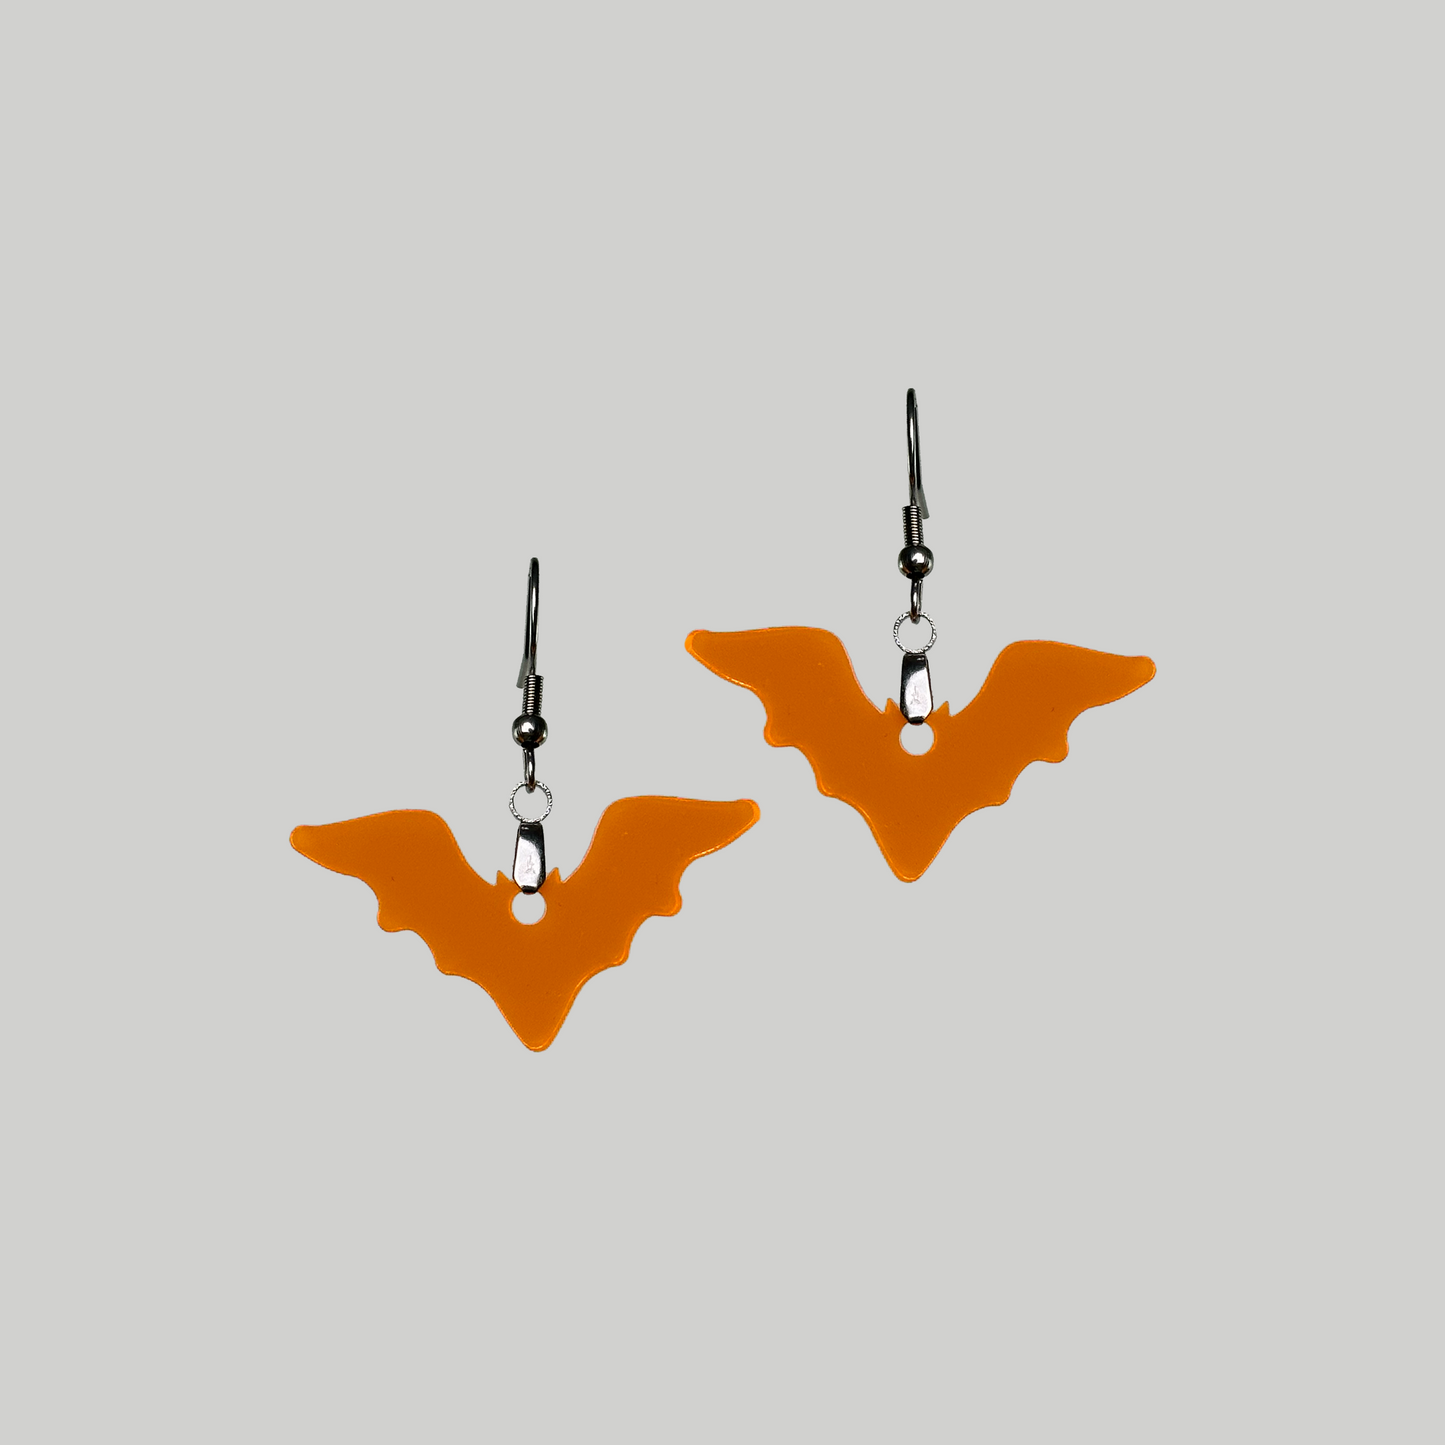 Gothic Glam Bat Earrings: Elevate your style with these gothic-inspired bat earrings, perfect for an edgy and chic look. Made by Our Family Designs